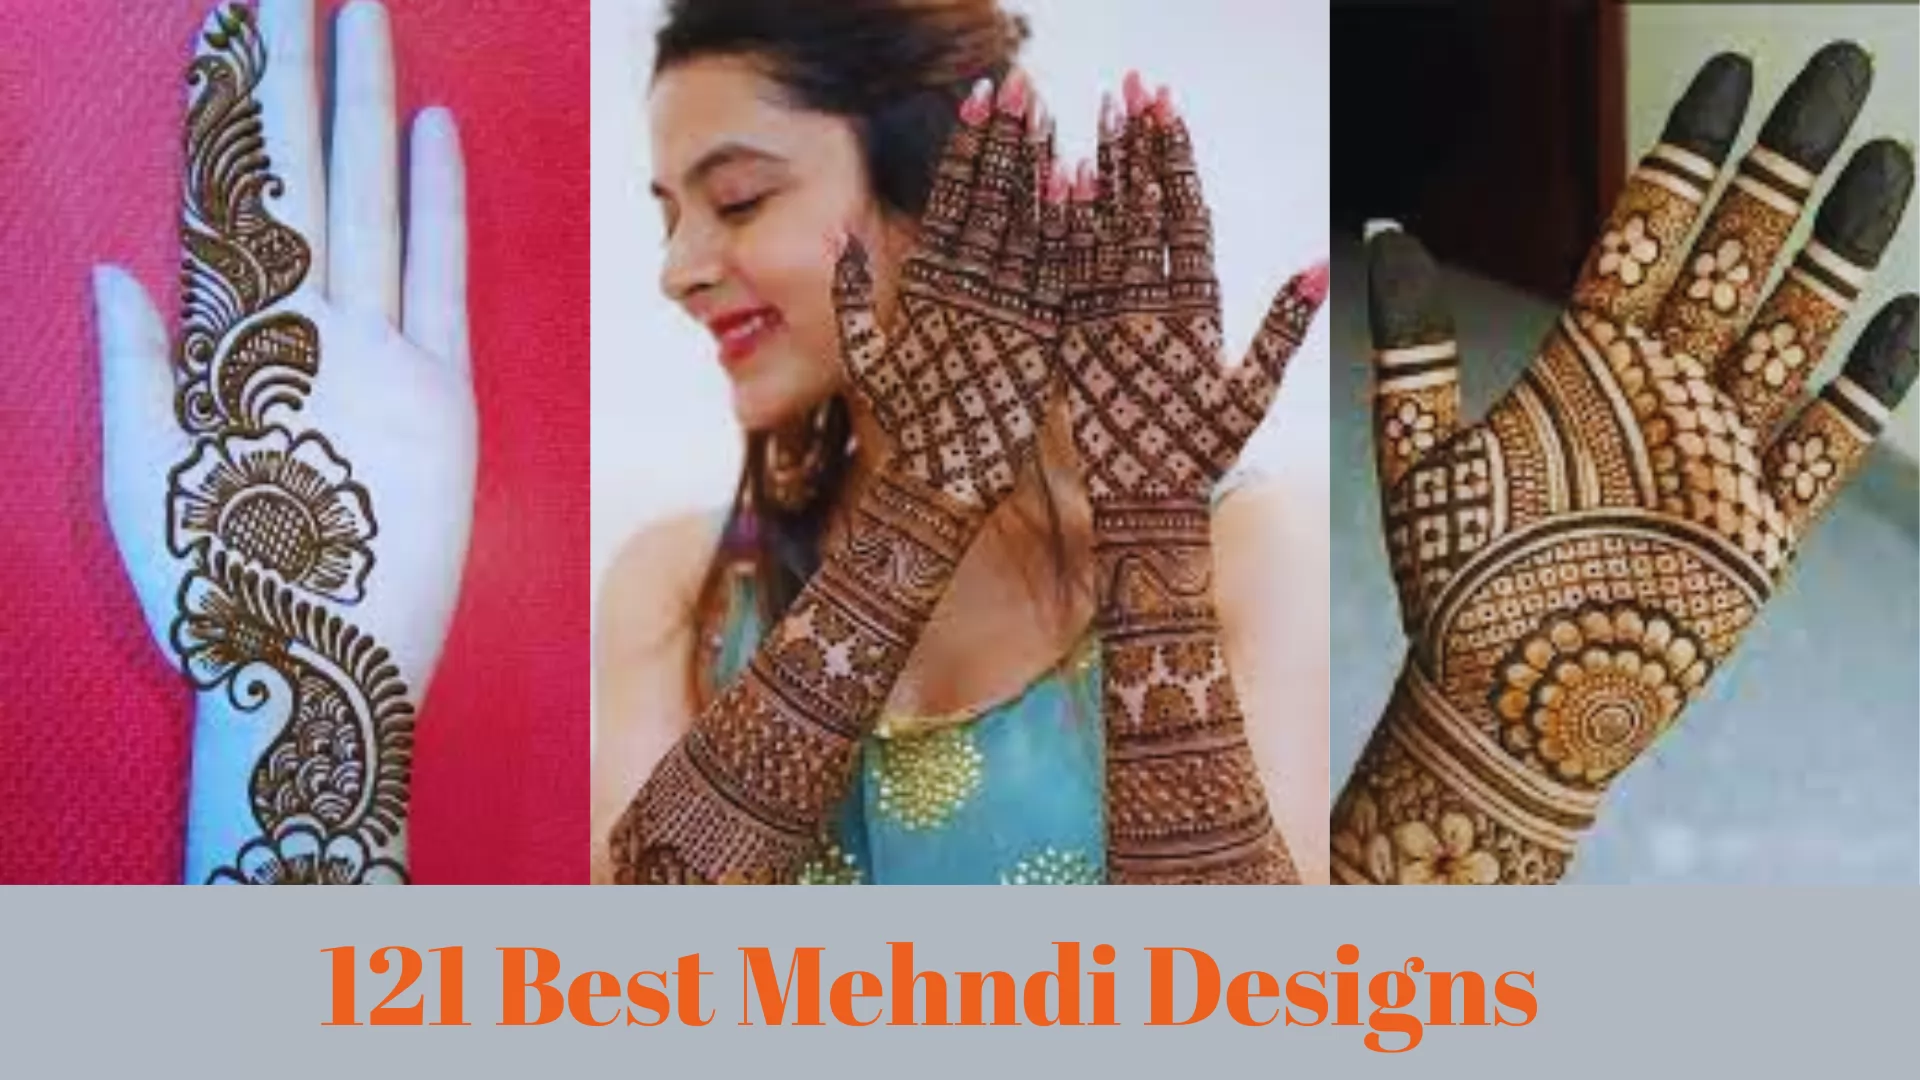 Bookmark These Latest Back Hand Bridal Mehendi Designs For Your D-day! | Mehndi  designs for hands, Mehndi designs for beginners, Back hand mehndi designs